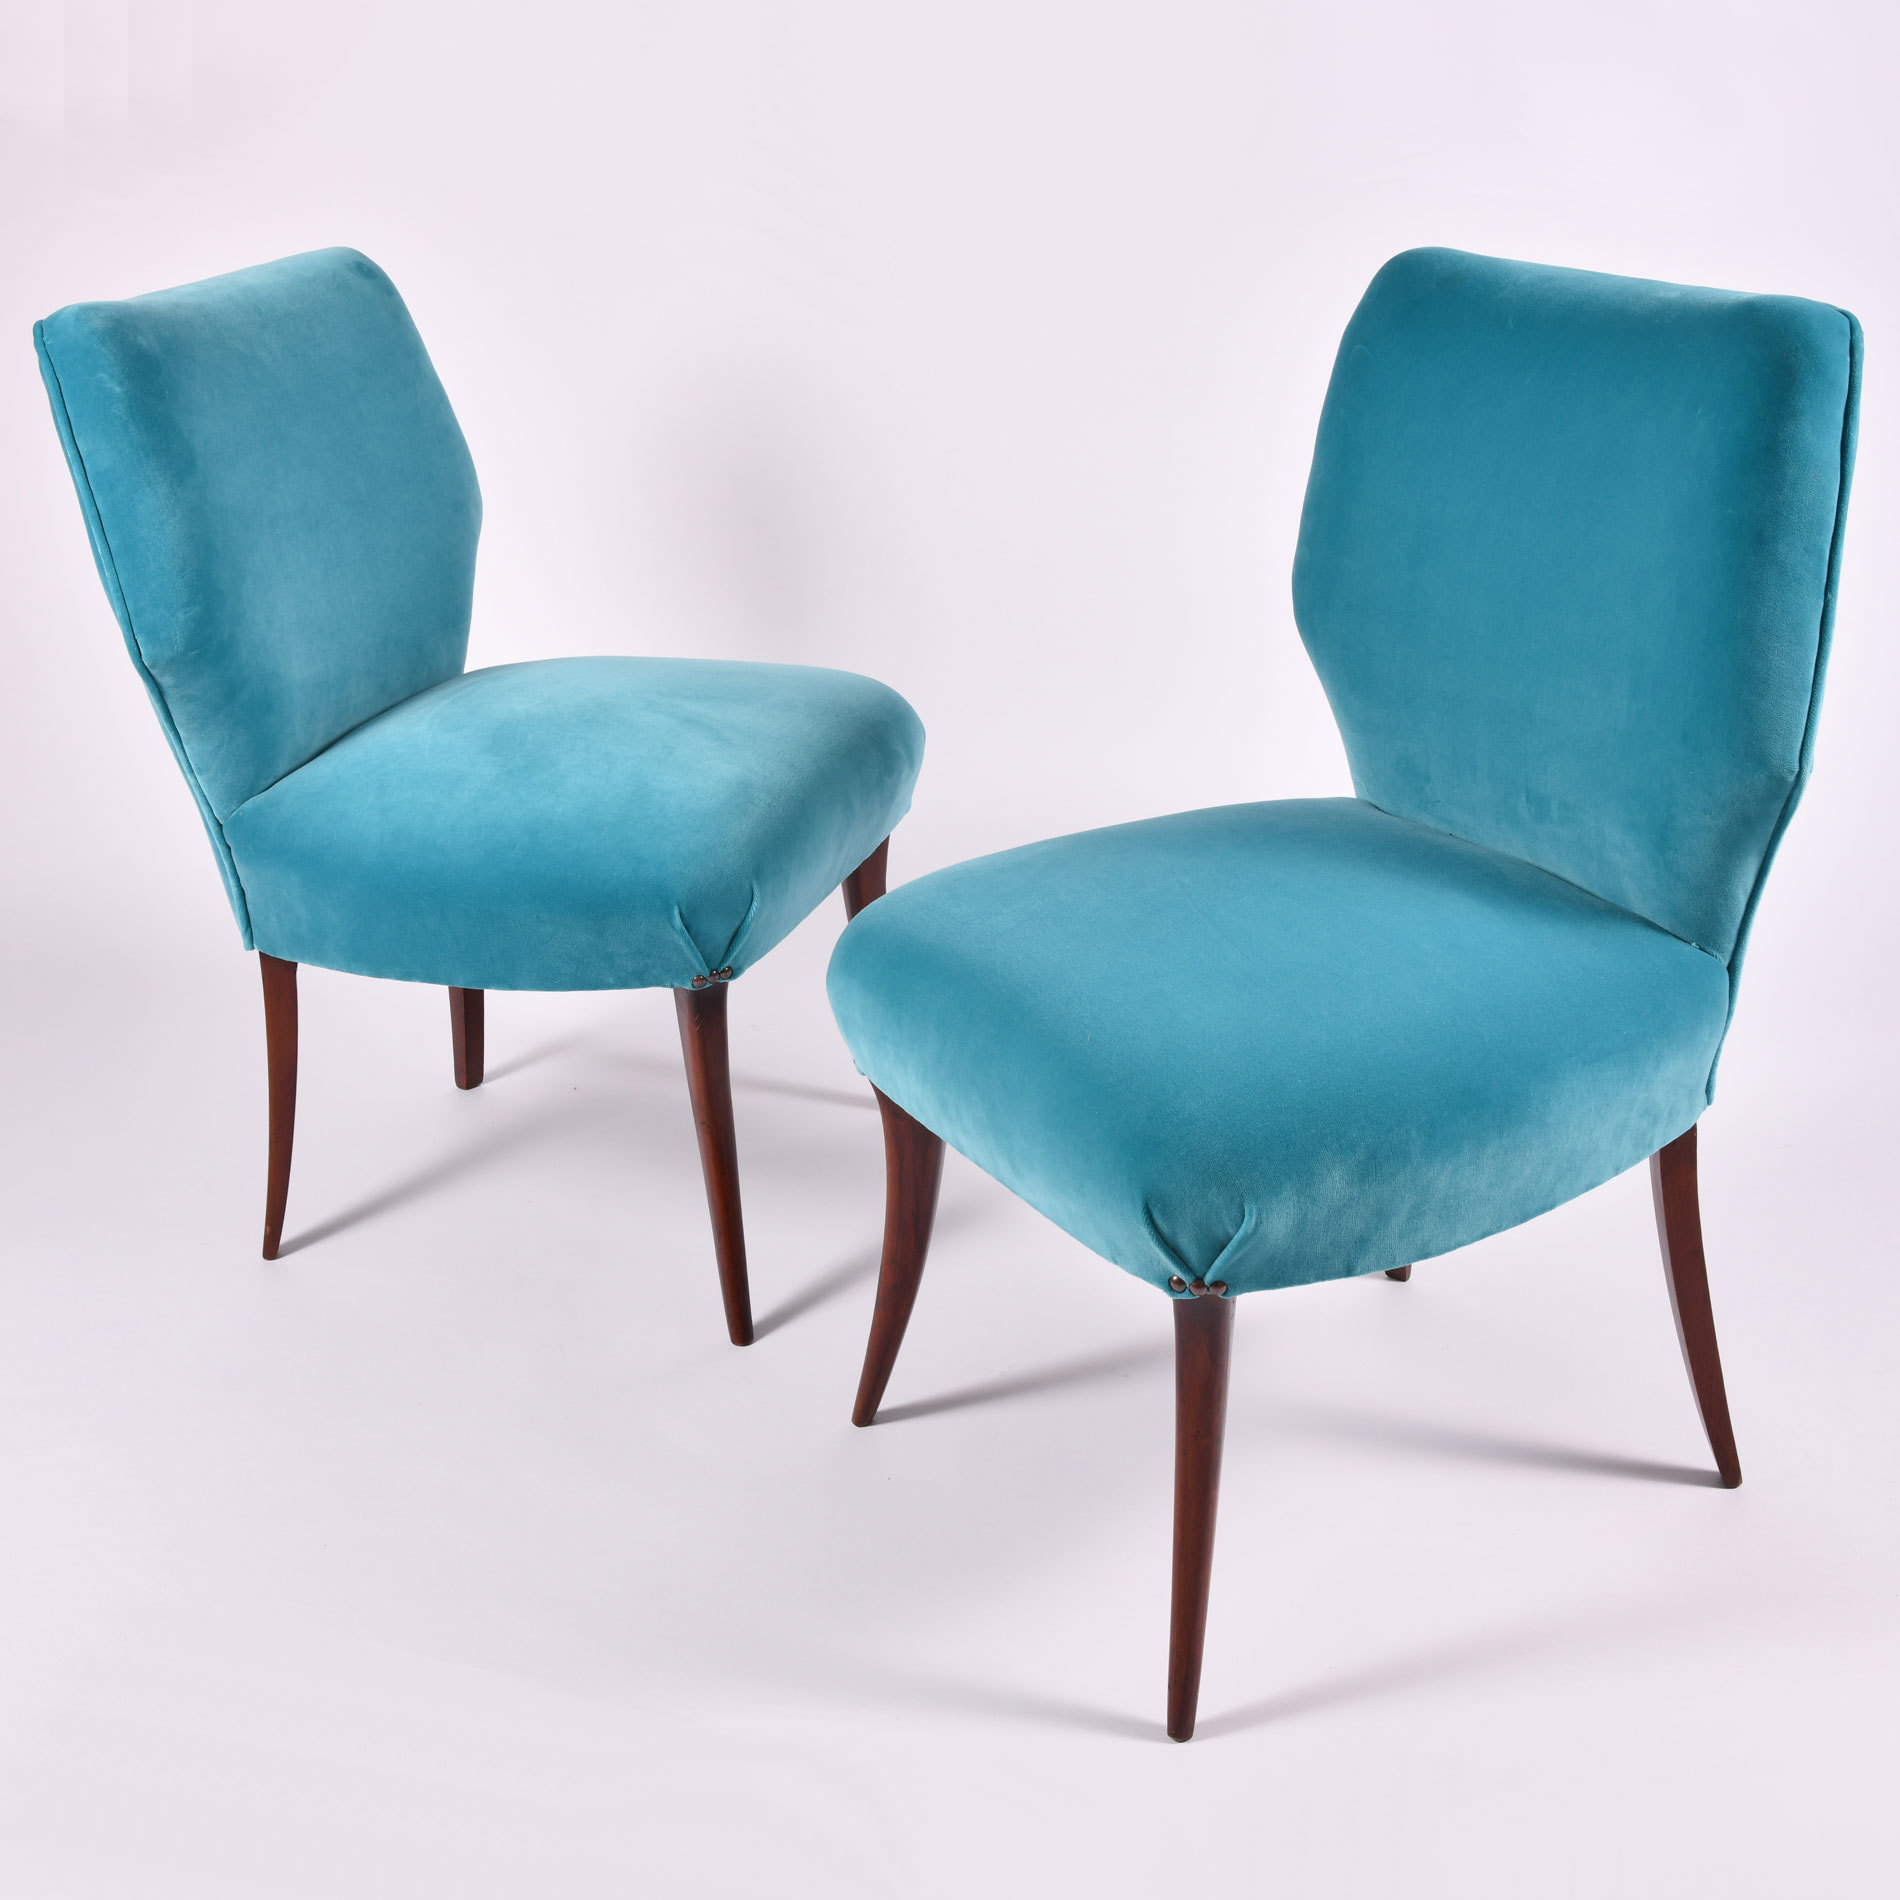 The image for Pair Turquoise Velvet Chairs 02